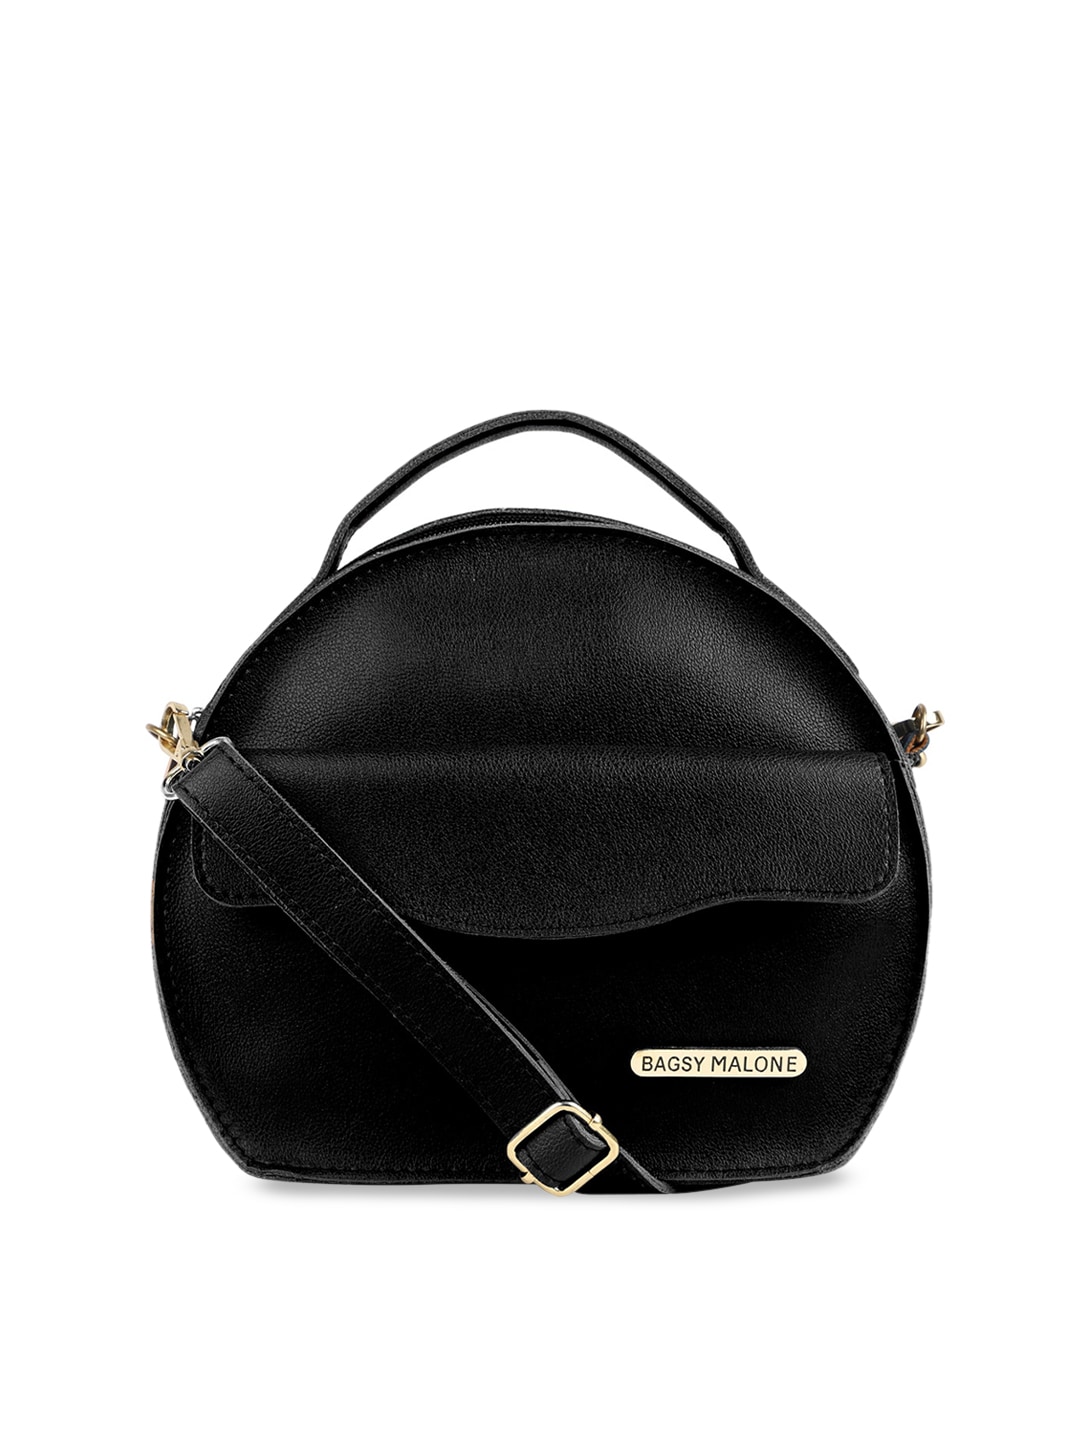 Bagsy Malone Black Solid Sling Bag Price in India